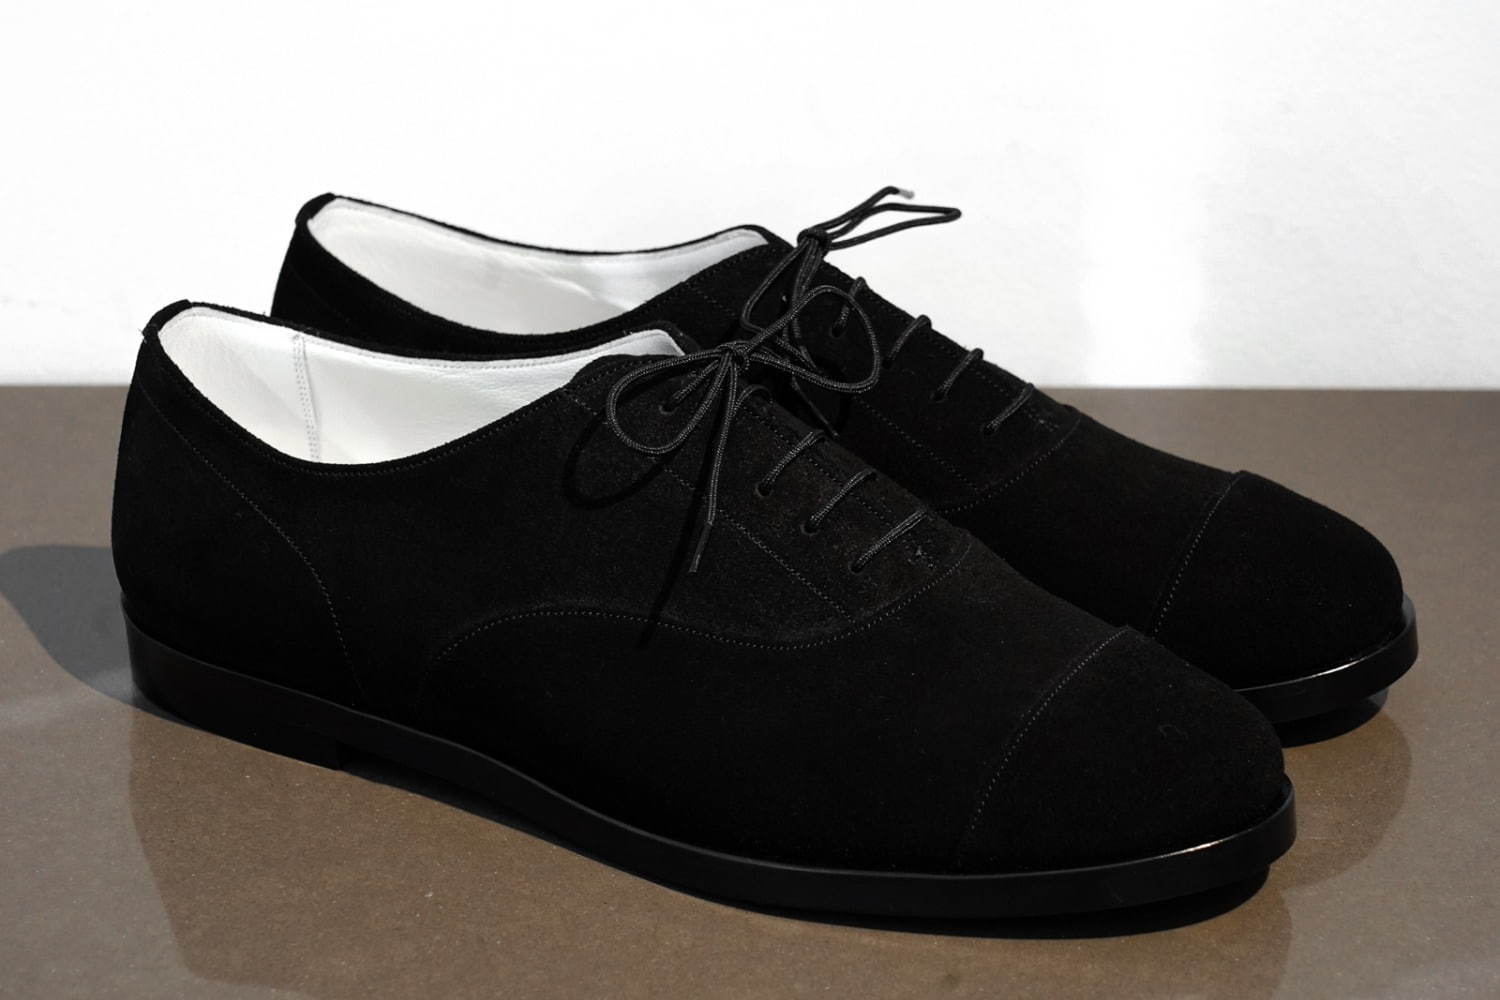 FRENCH OXFORD(LEATHER) 39,000円＋税